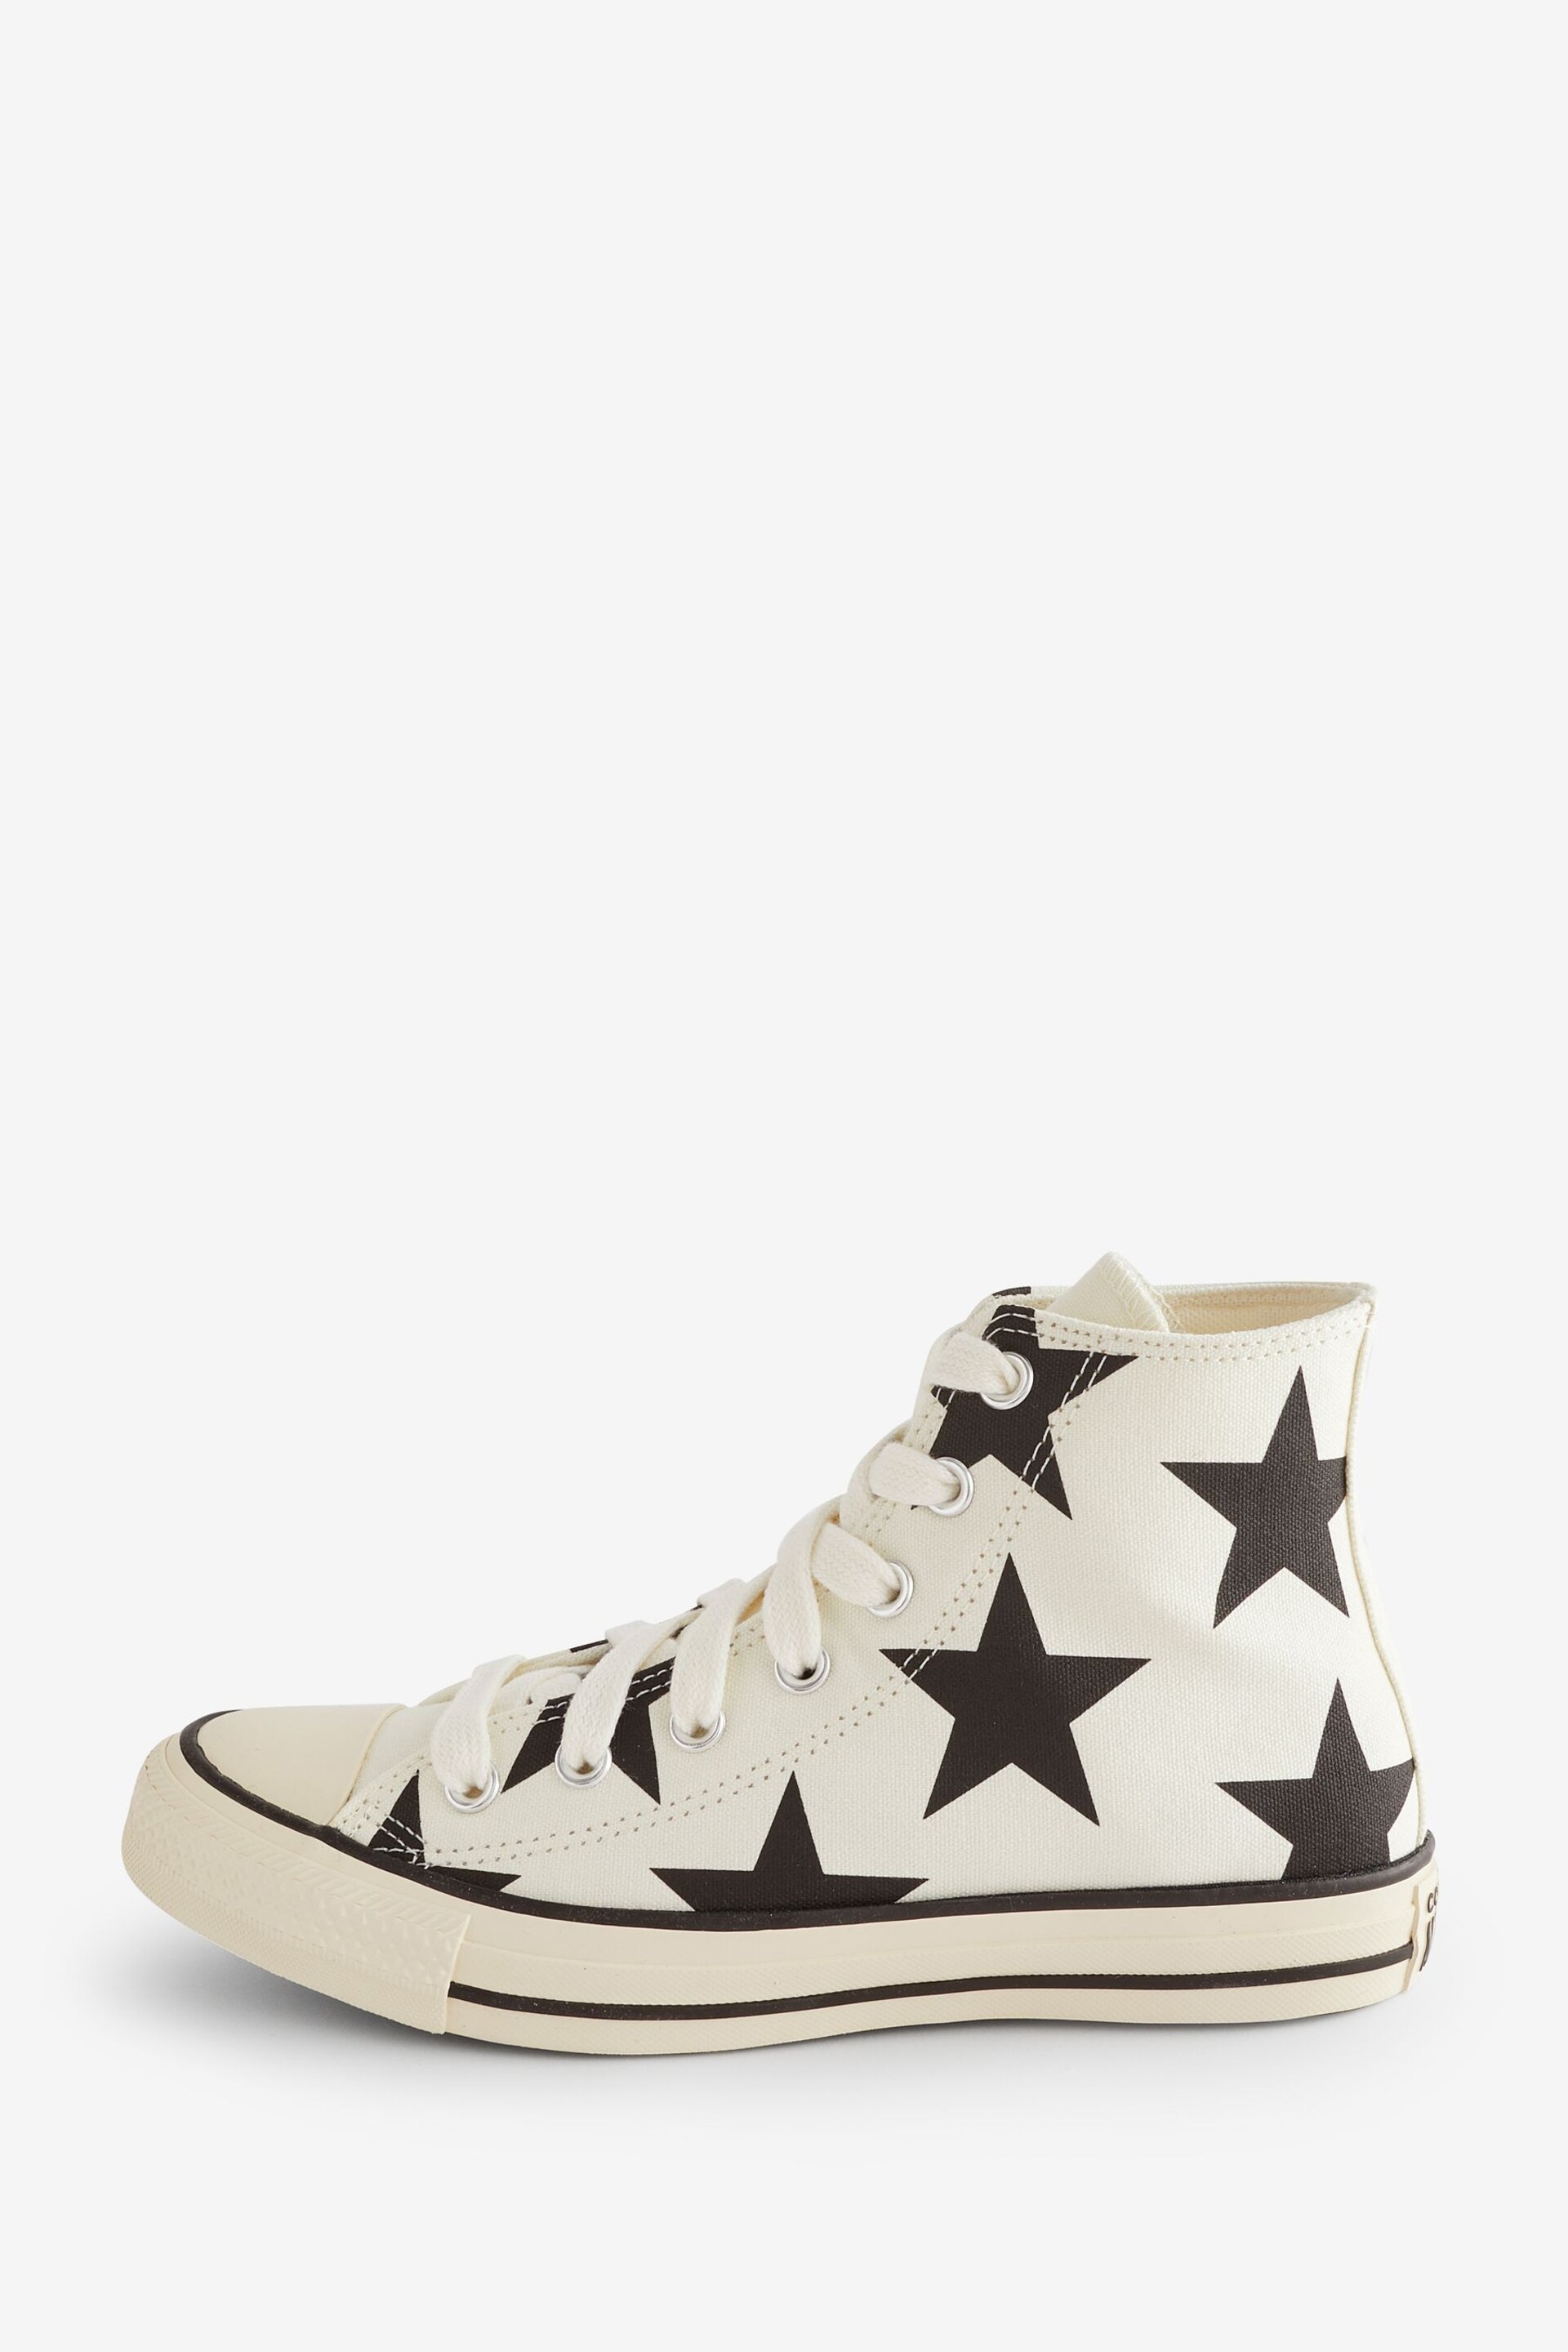 Converse White/Black Chuck Taylor All Star Lift Star Print Trainers - Image 2 of 9